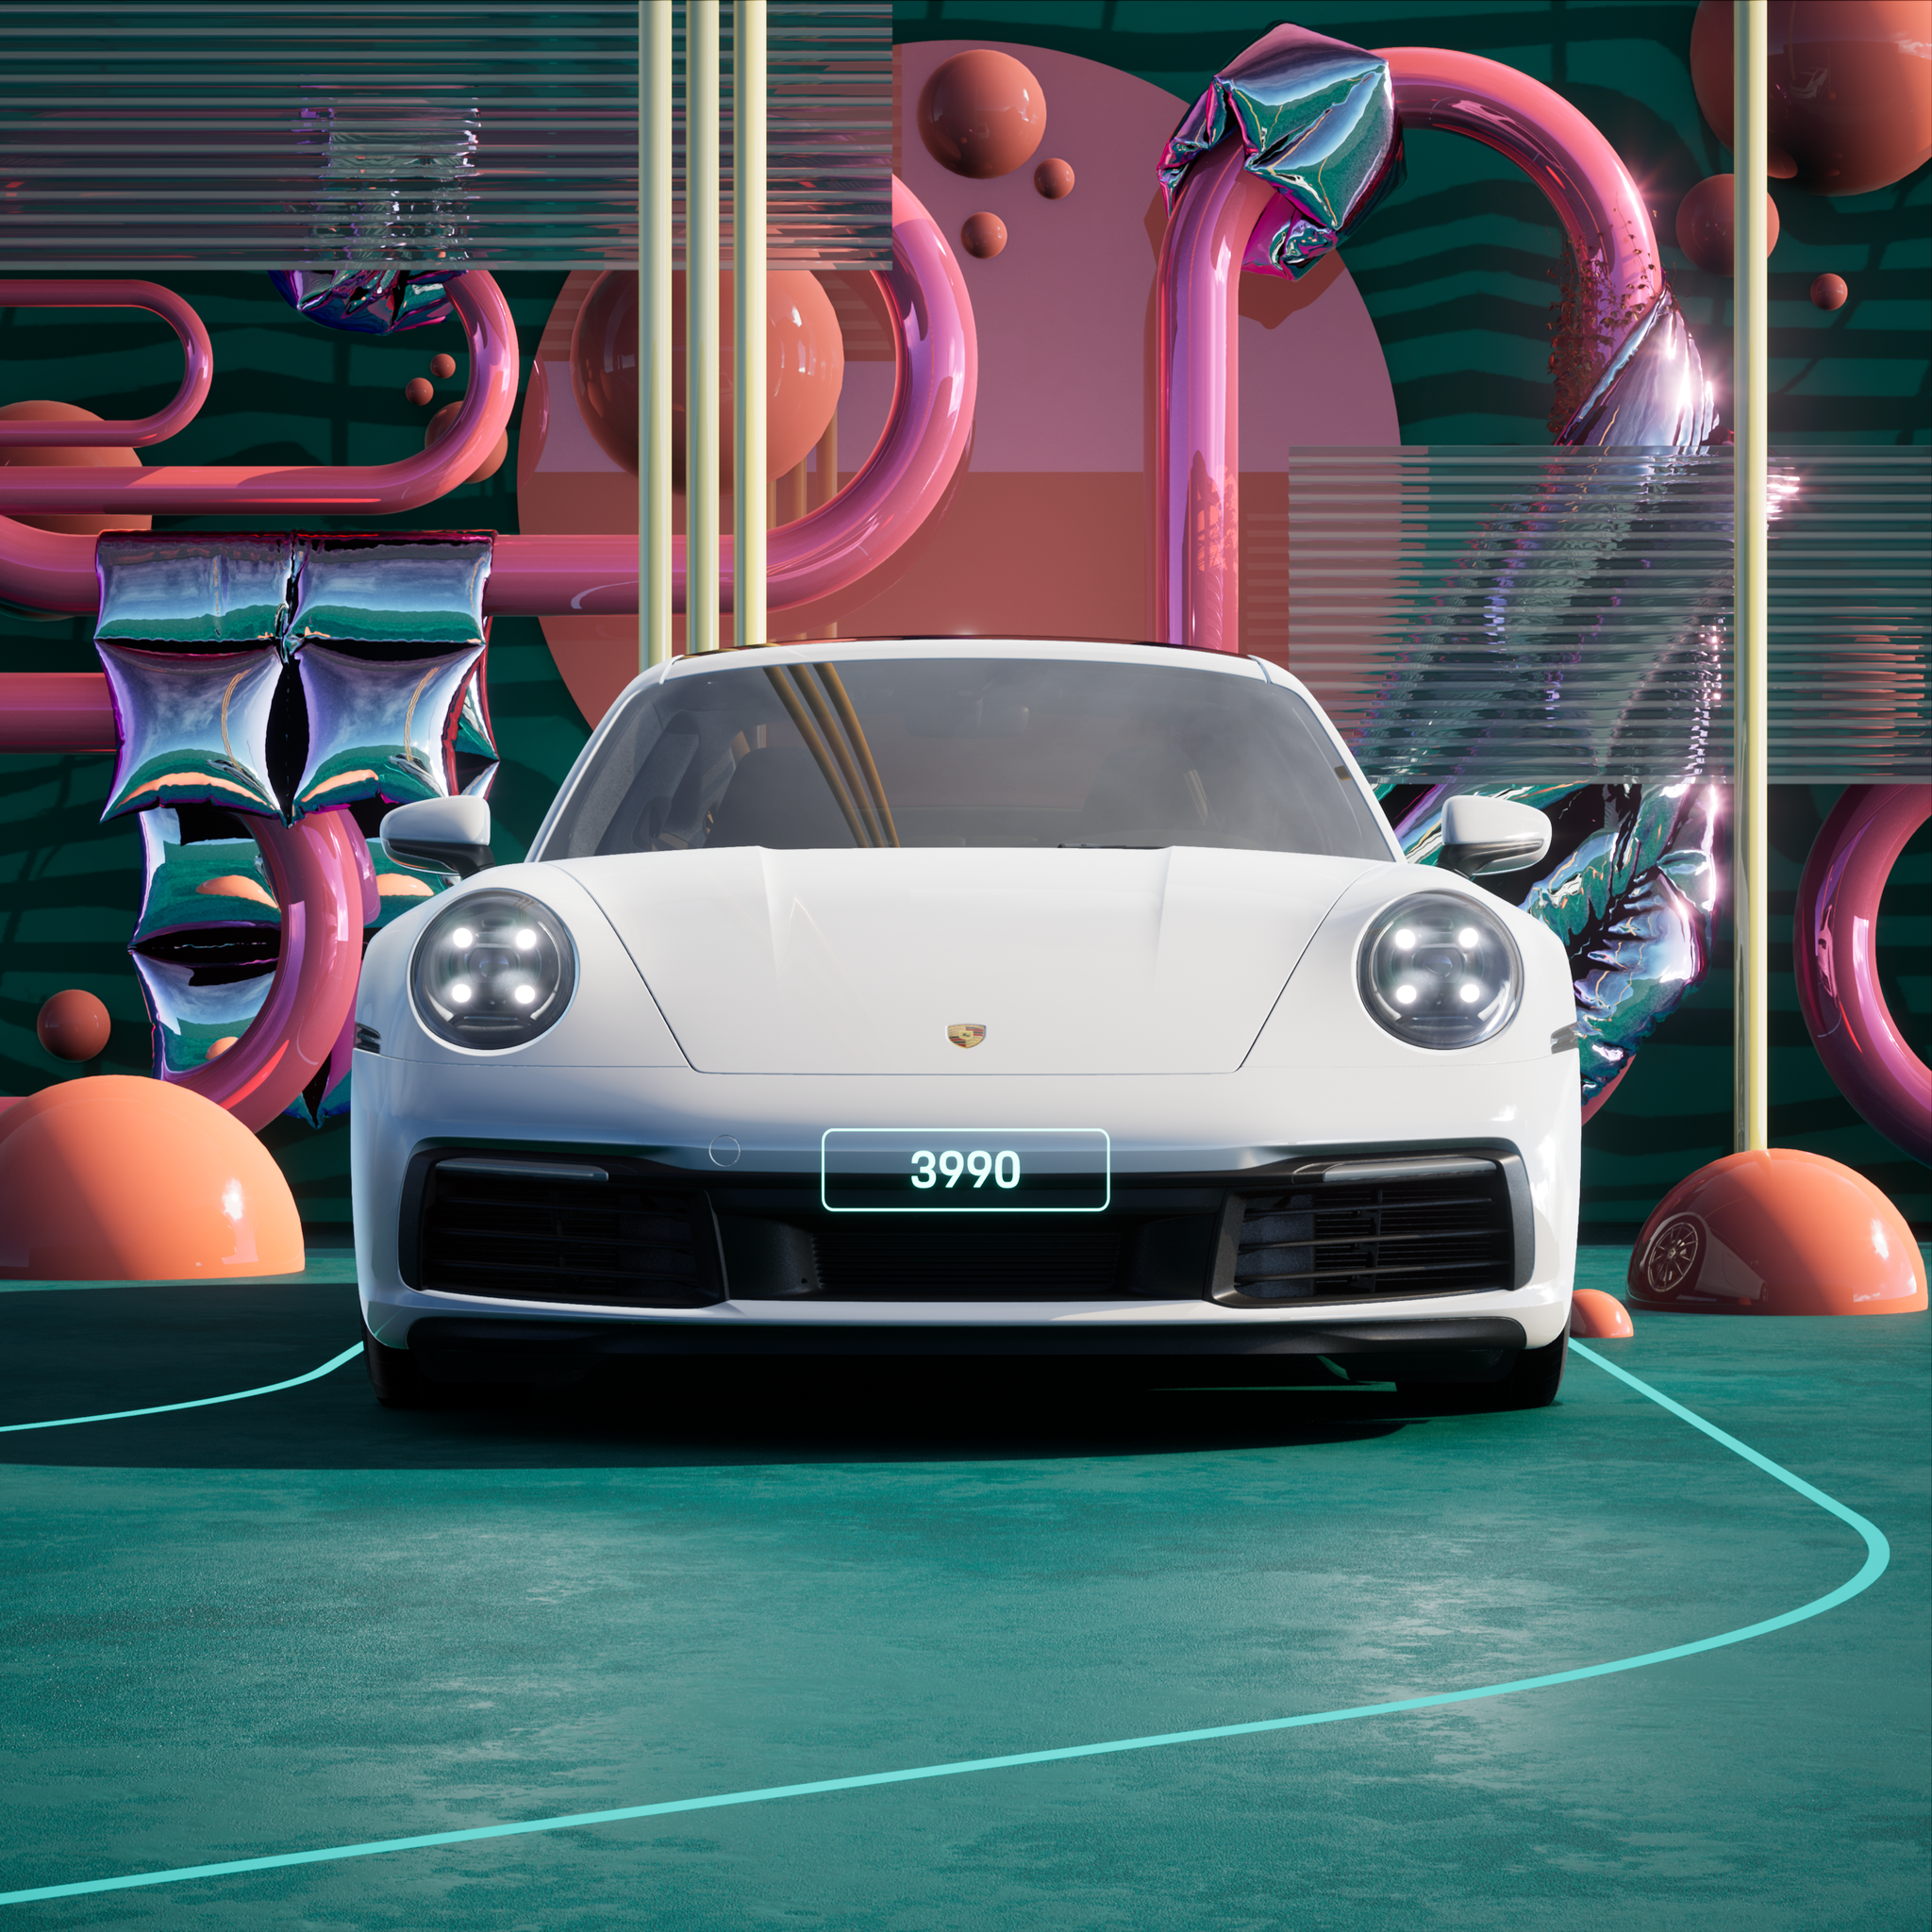 The PORSCHΞ 911 3990 image in phase